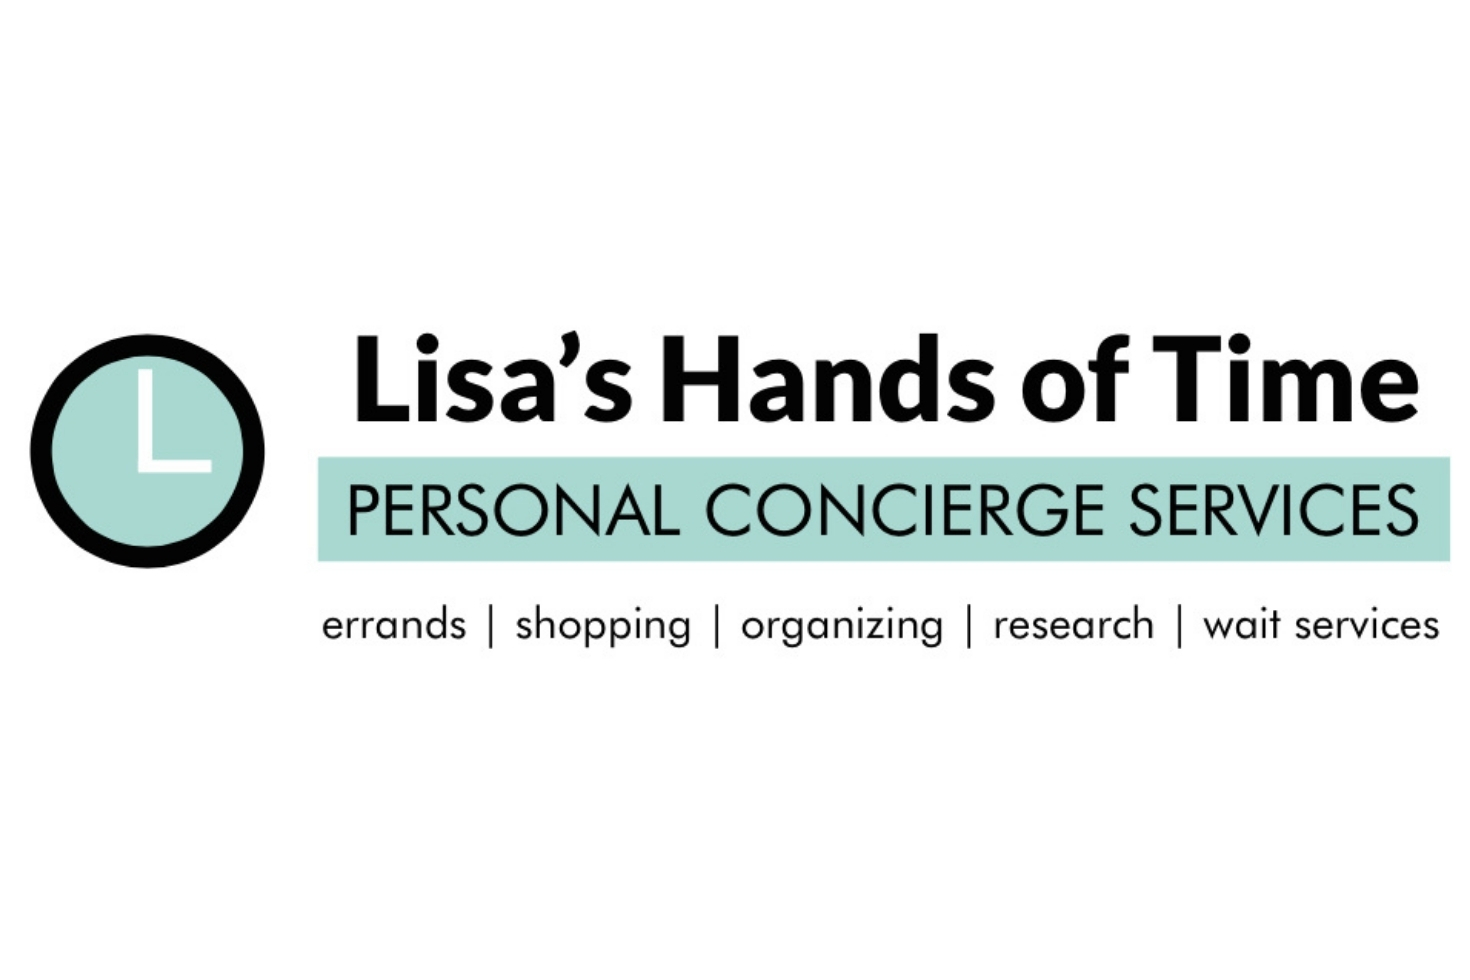 Clock icon next to text "Lisa's Hands of Time Concierge"